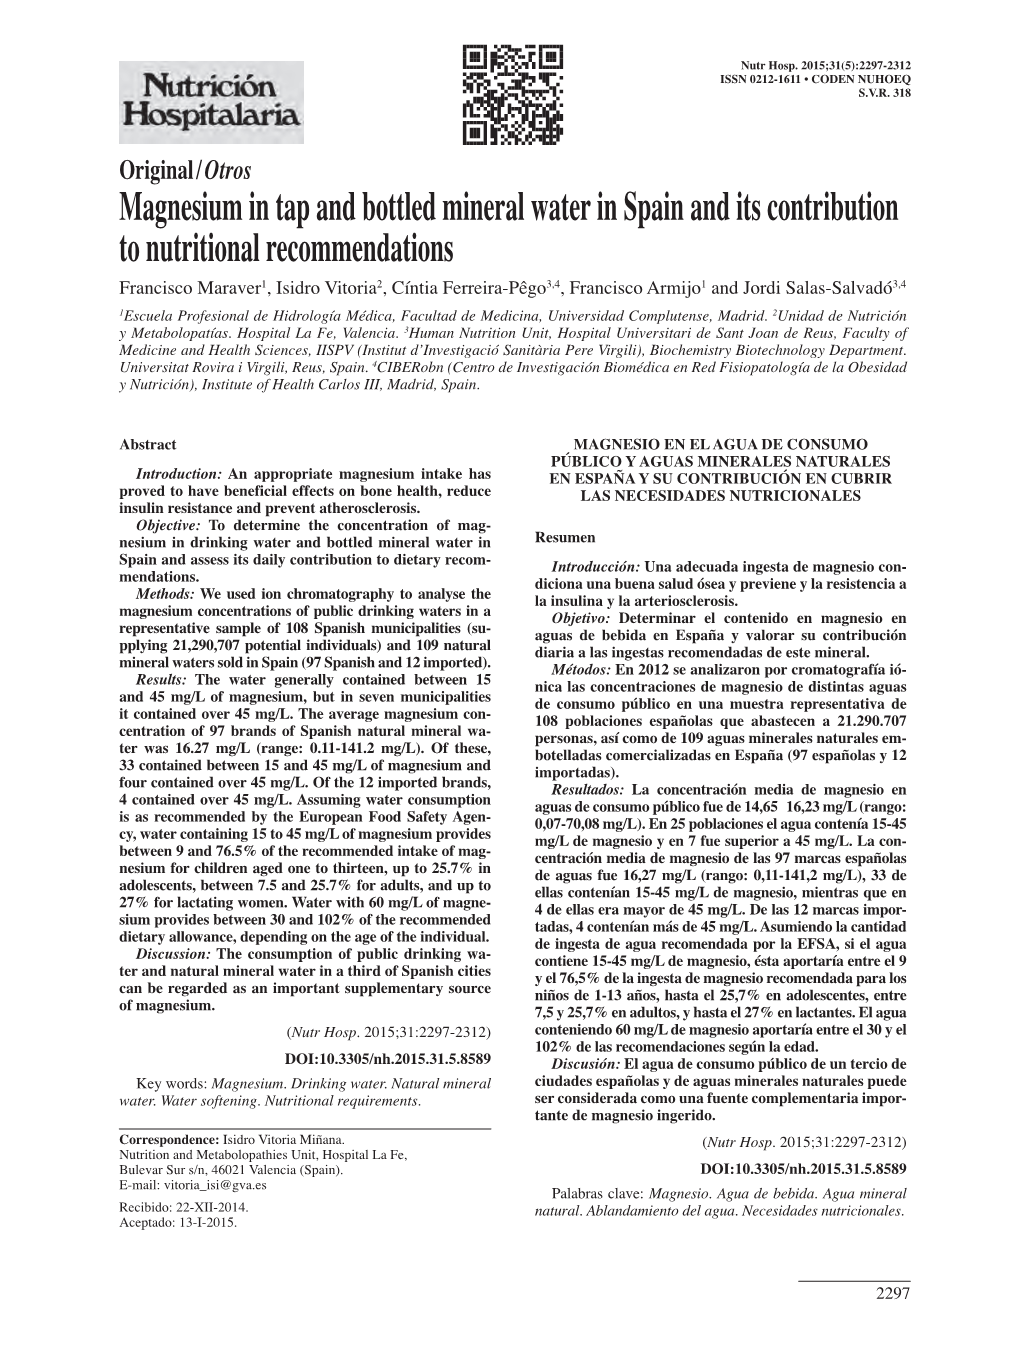 Magnesium in Tap and Bottled Mineral Water in Spain and Its Contribution